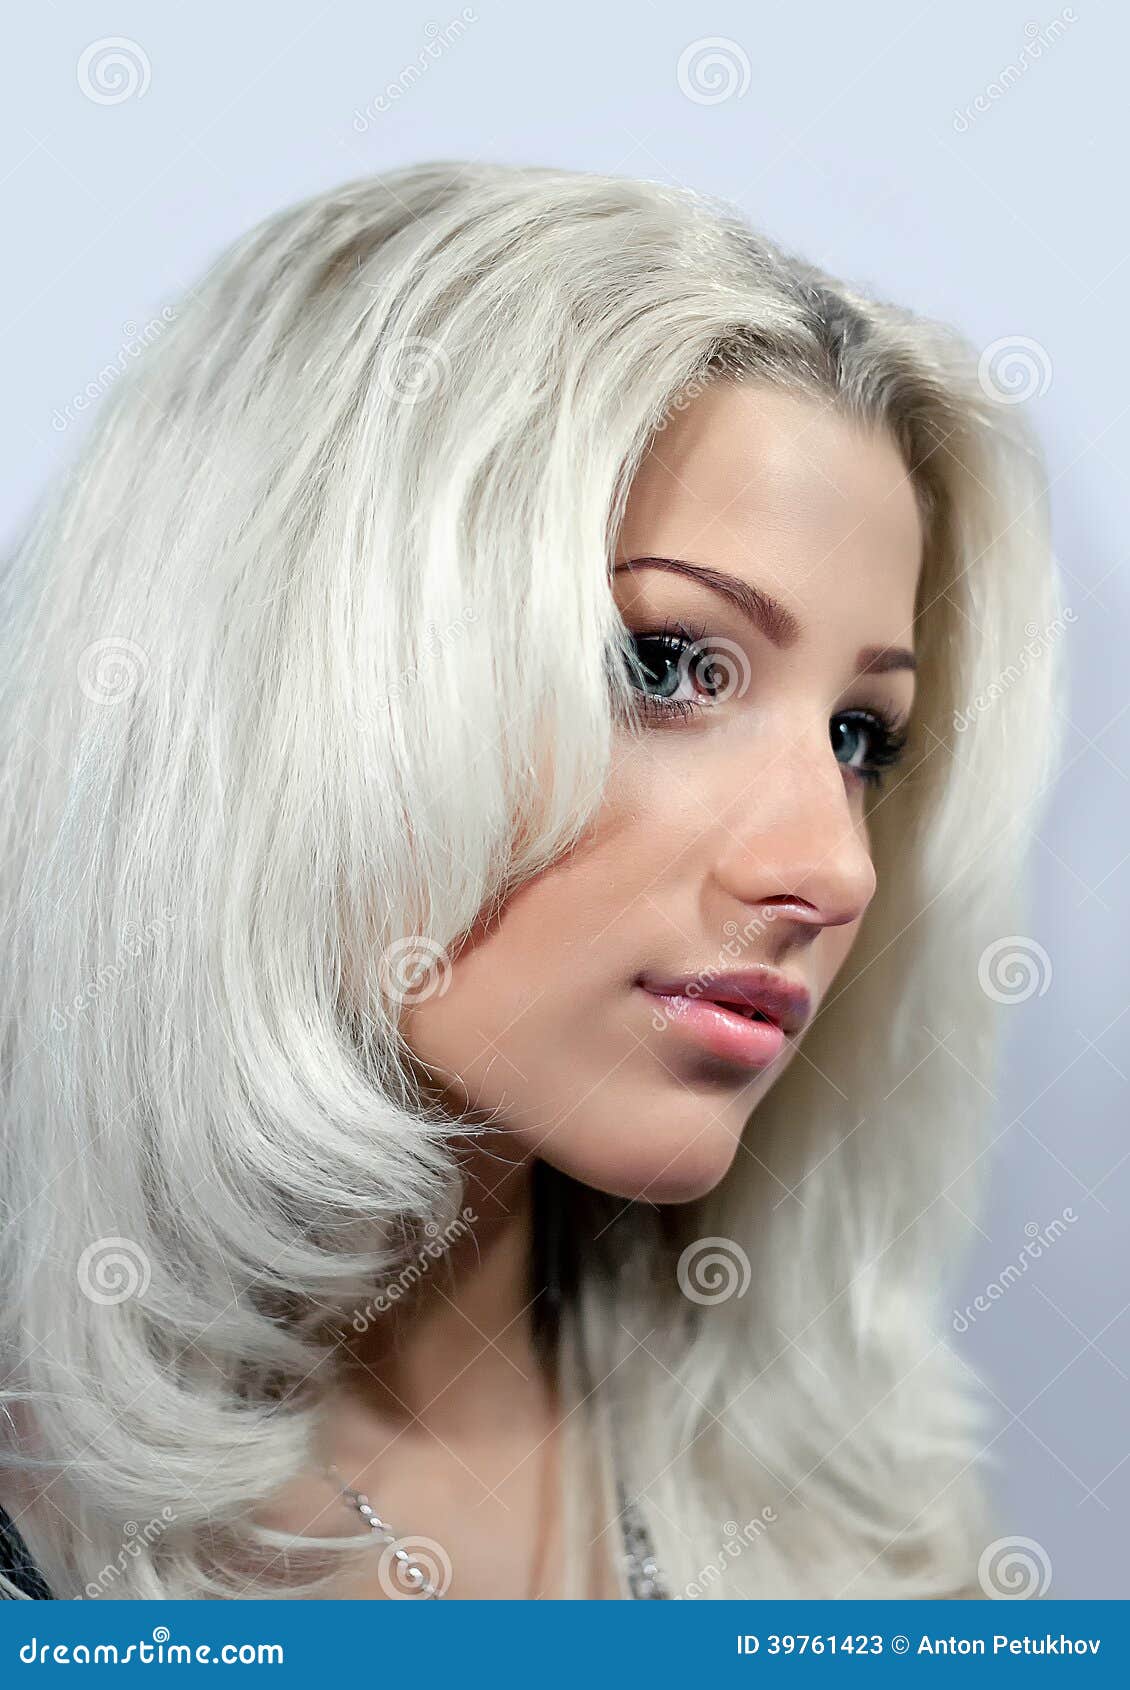 Young Attractive Woman With A White Hair Stock Image Image Of Sensuous Alluring 39761423